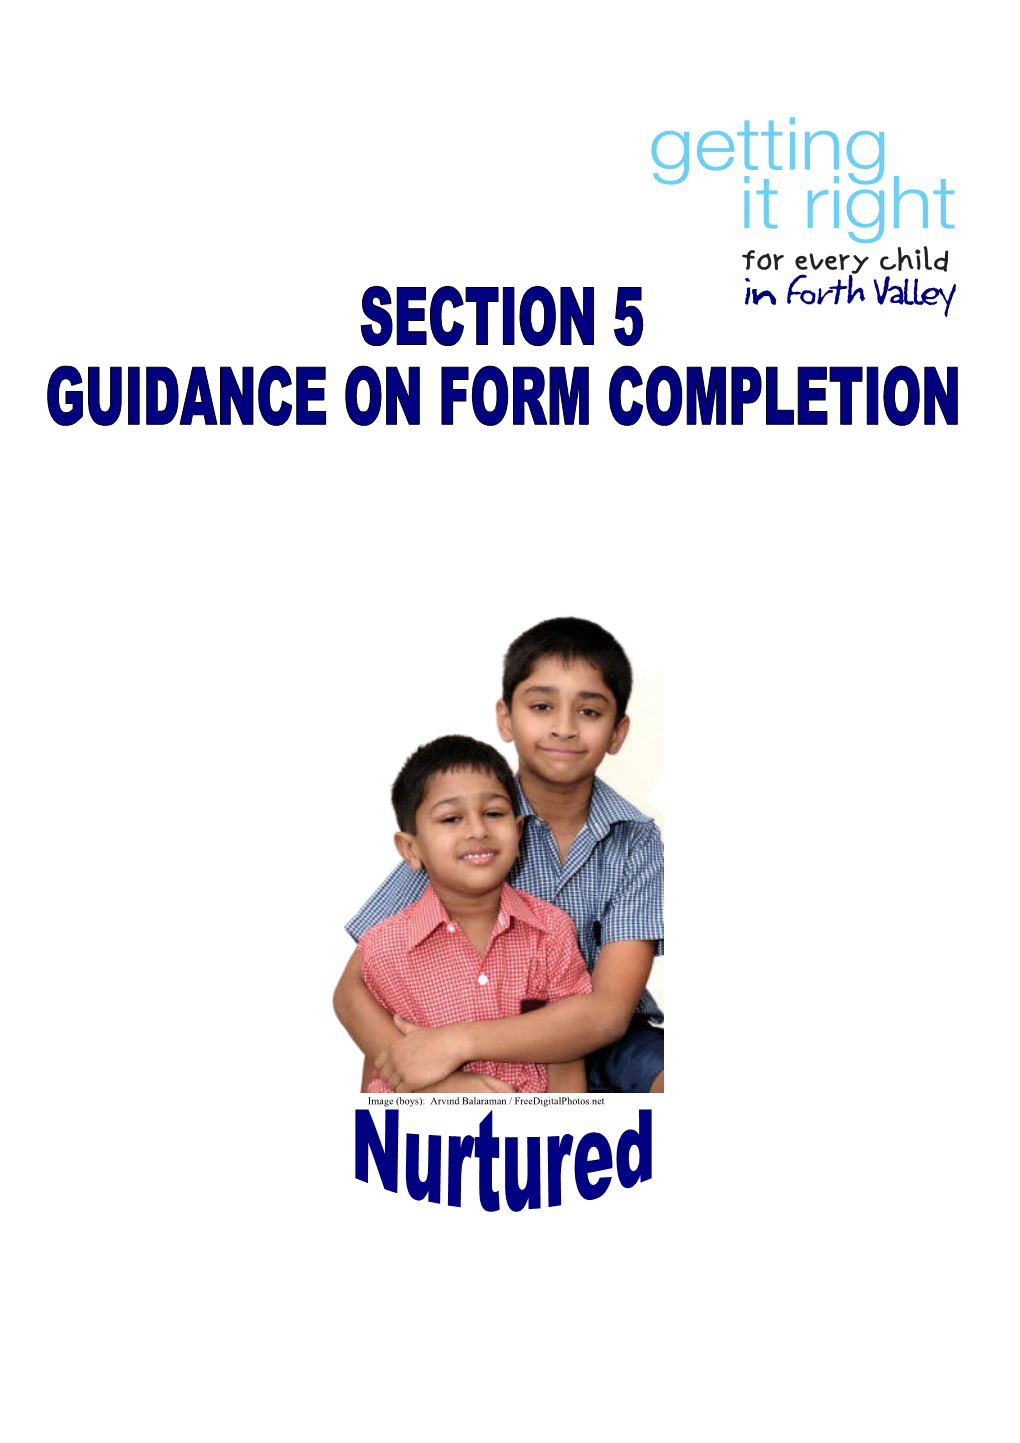 The Following Section Provides Detailed Guidance on Completion of the Forms